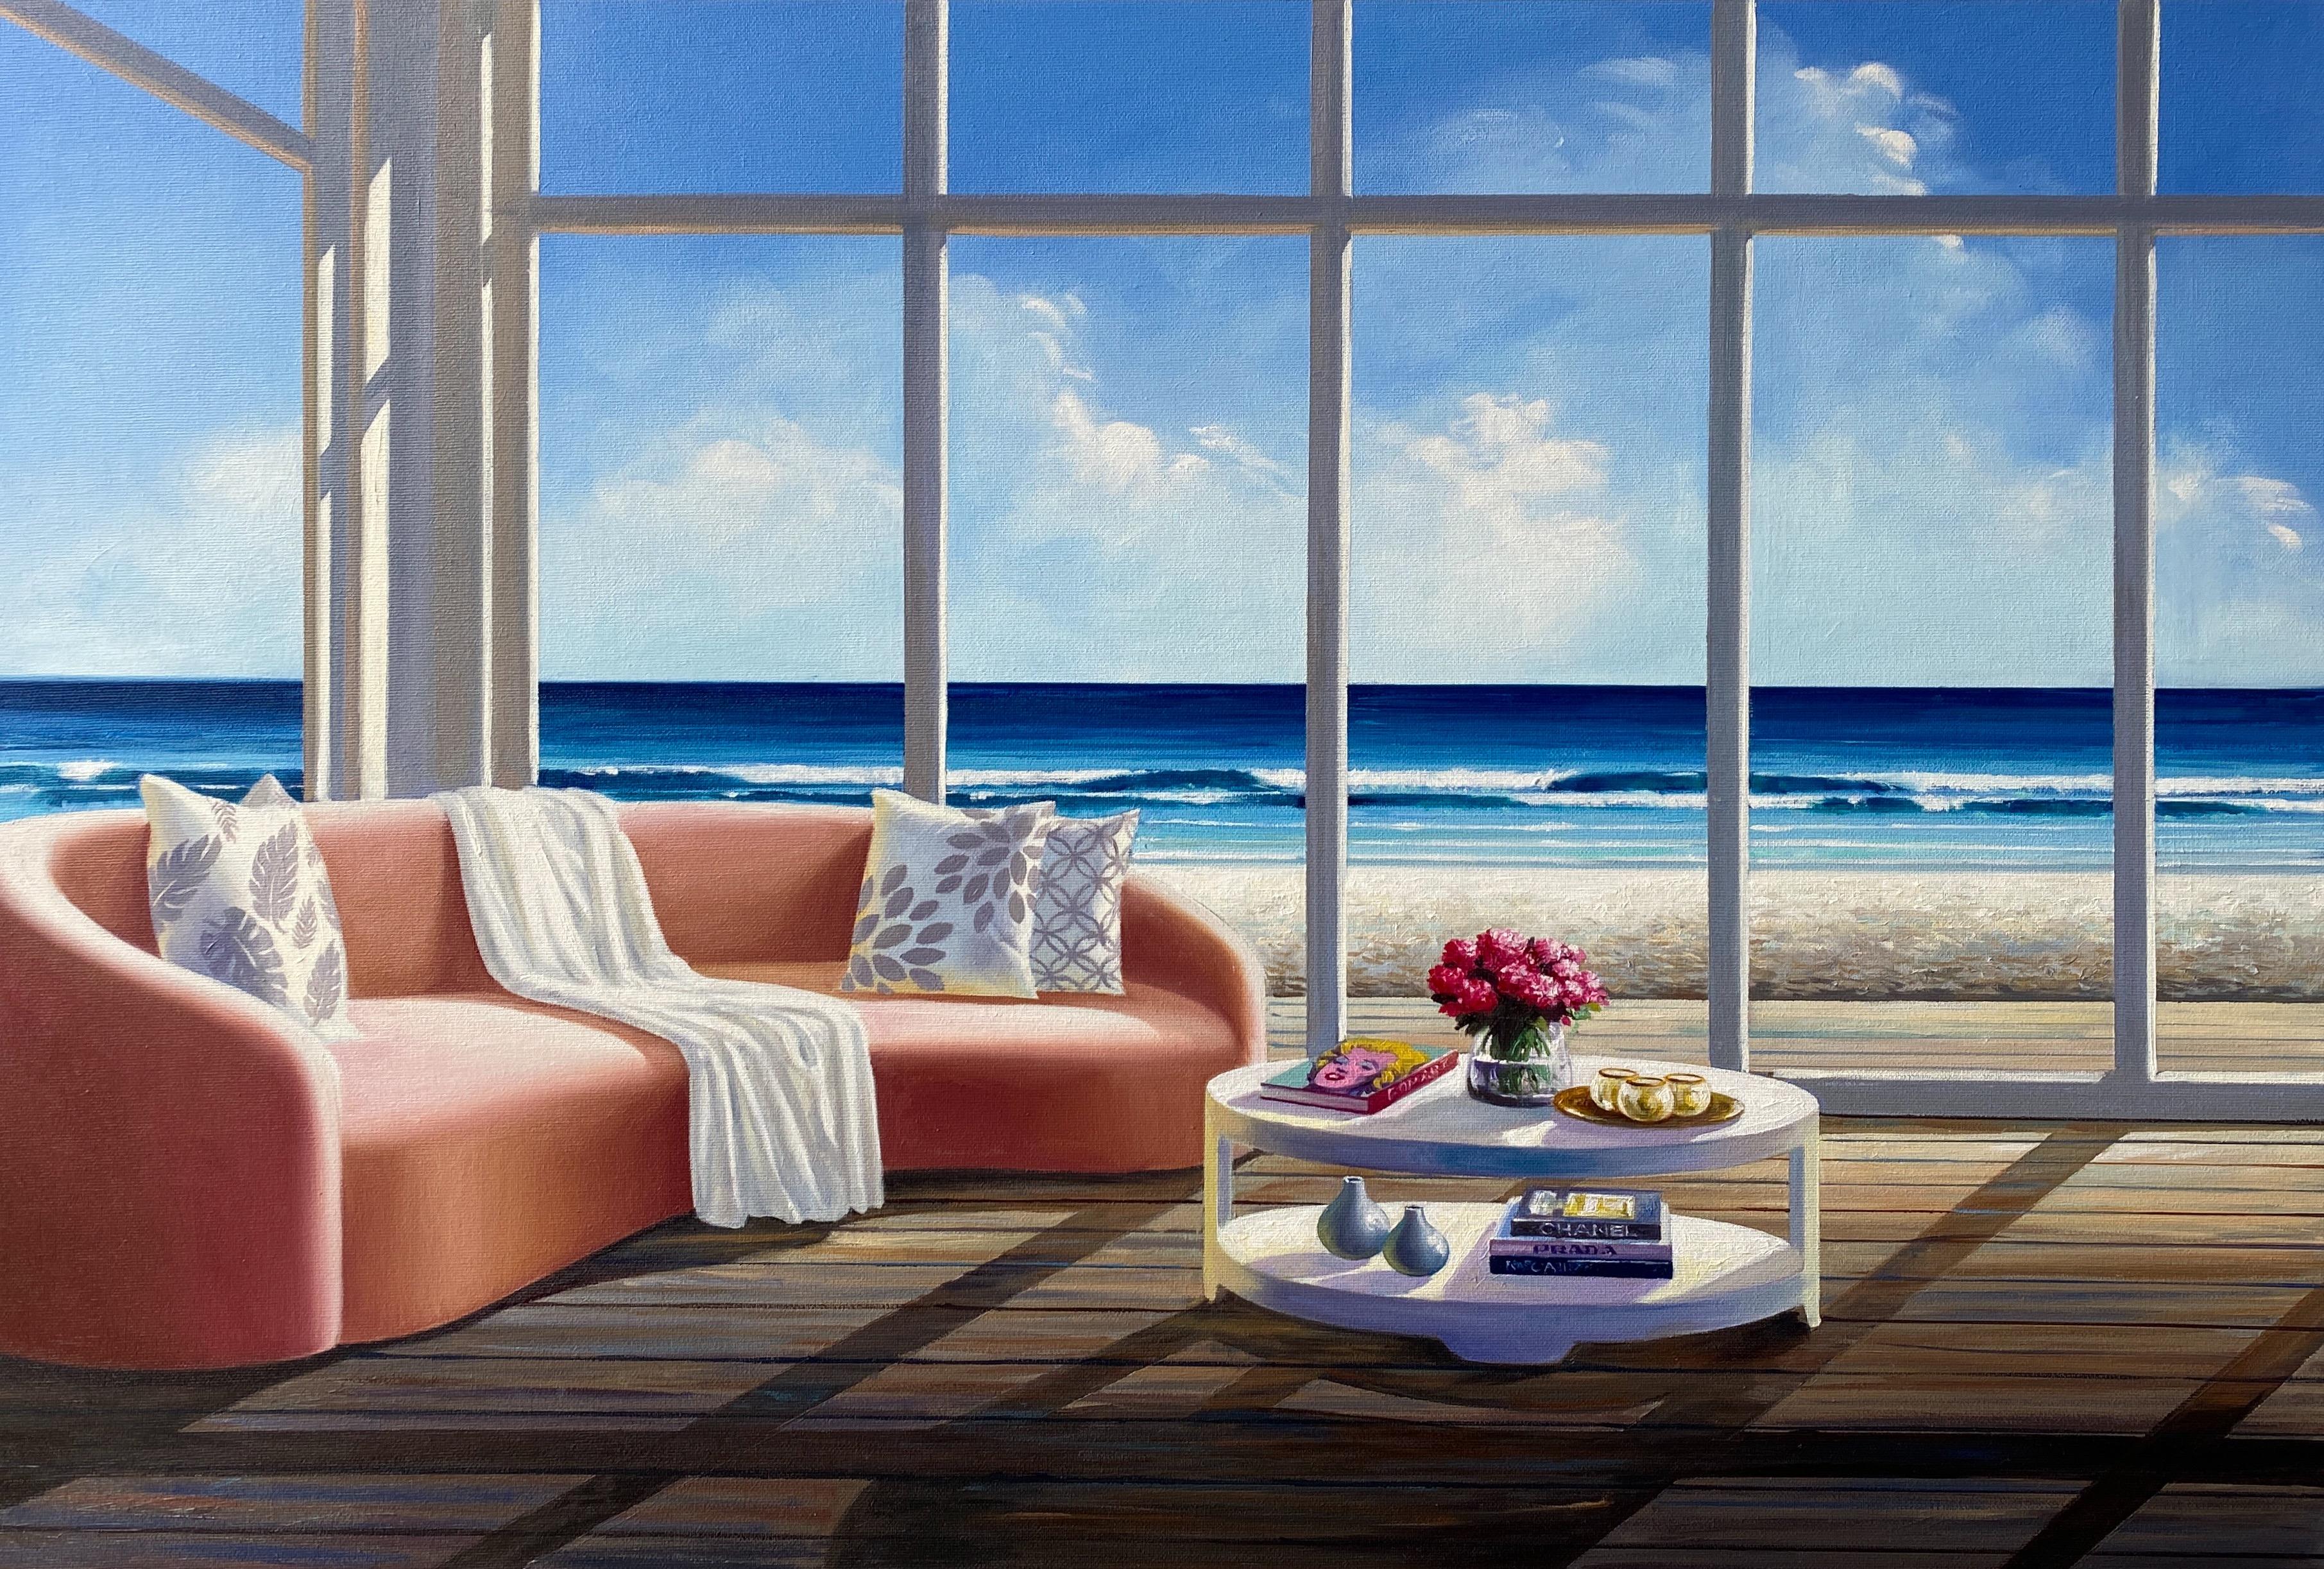 Books and Flowers-original surreal still life-interior-seascape oil painting-Art